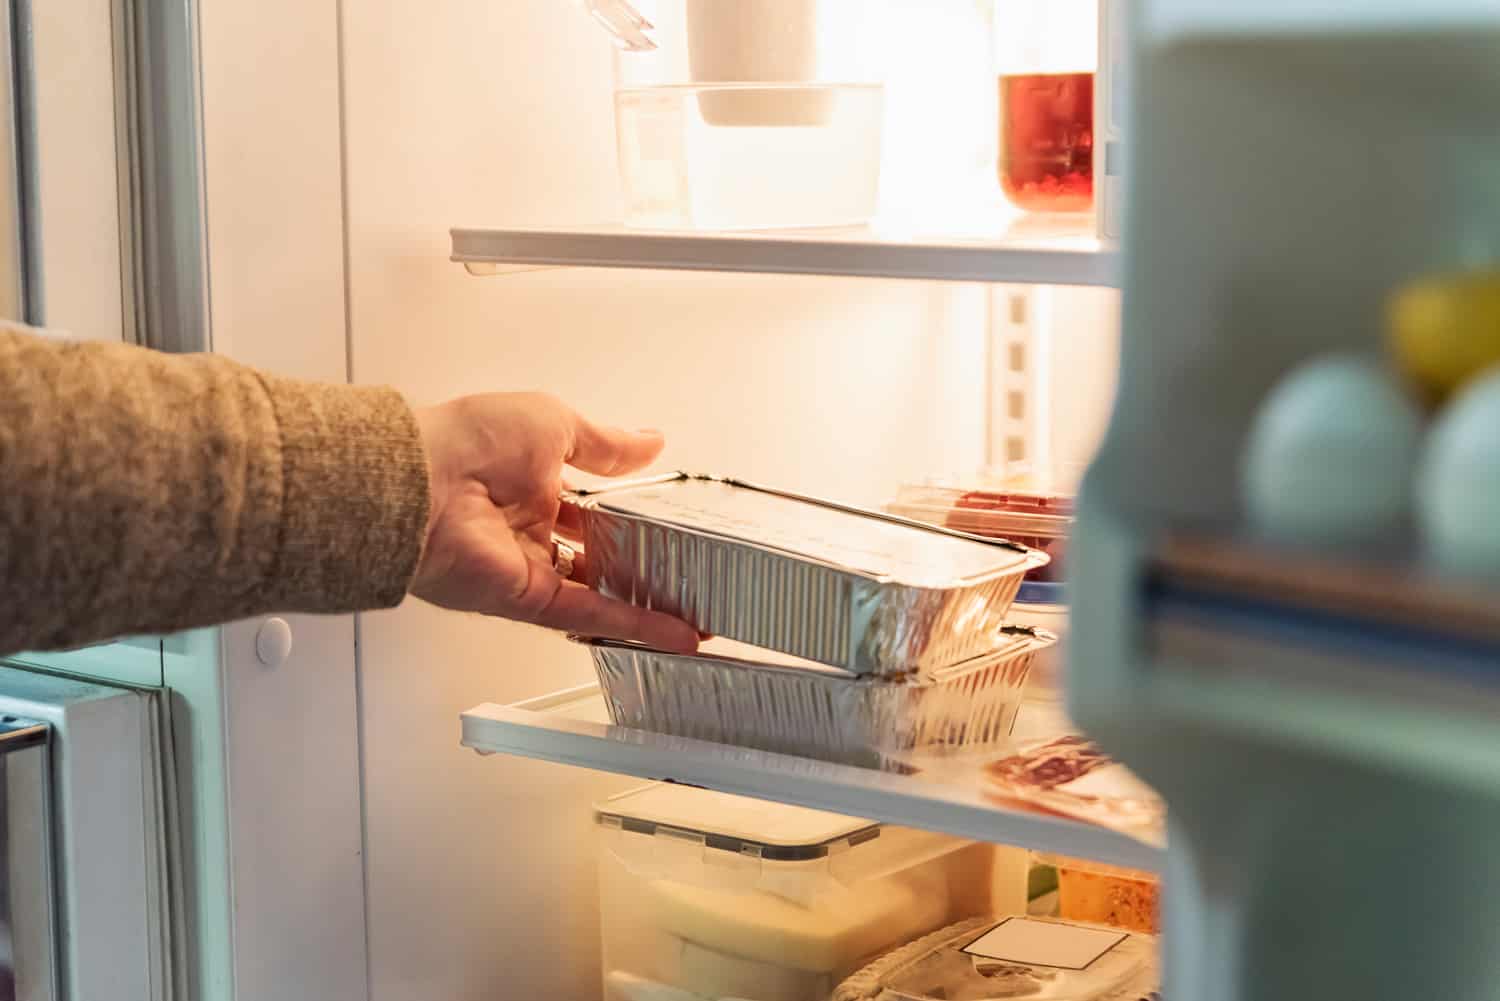 Man's hand taking takeout meal out of refrigerator. Horizontal indoors close-up with copy space.